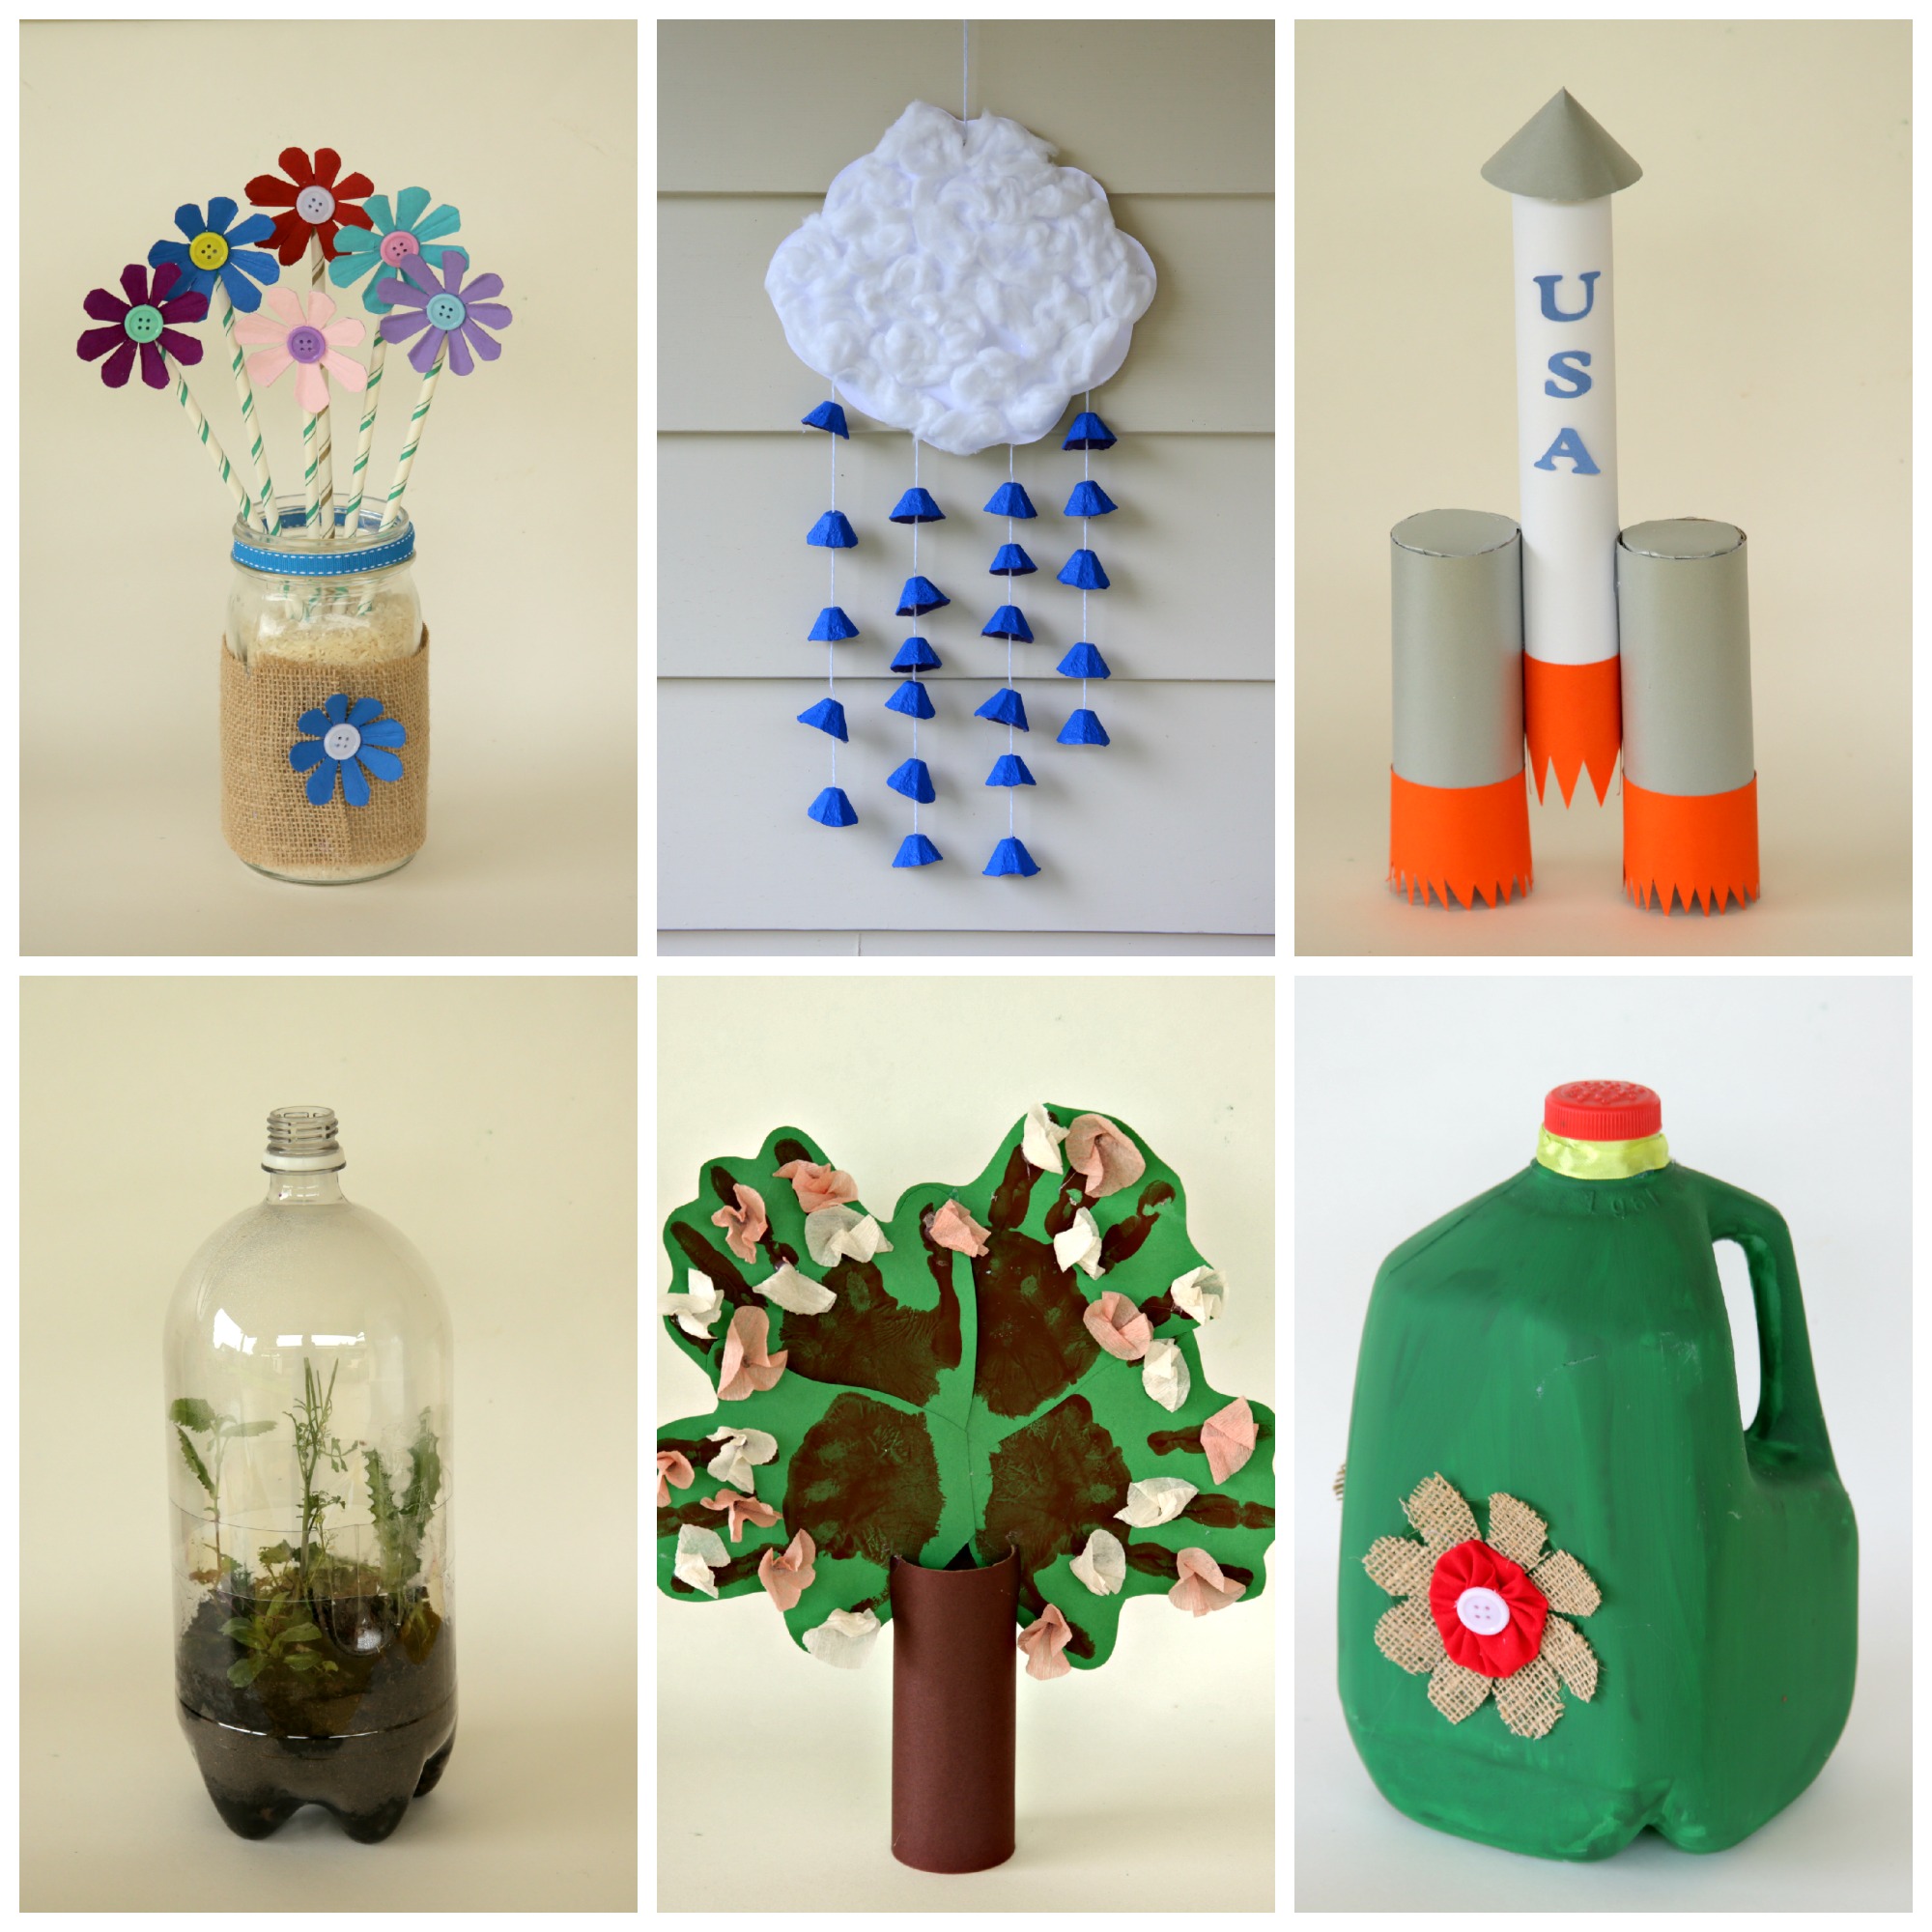 recycled materials craft ideas